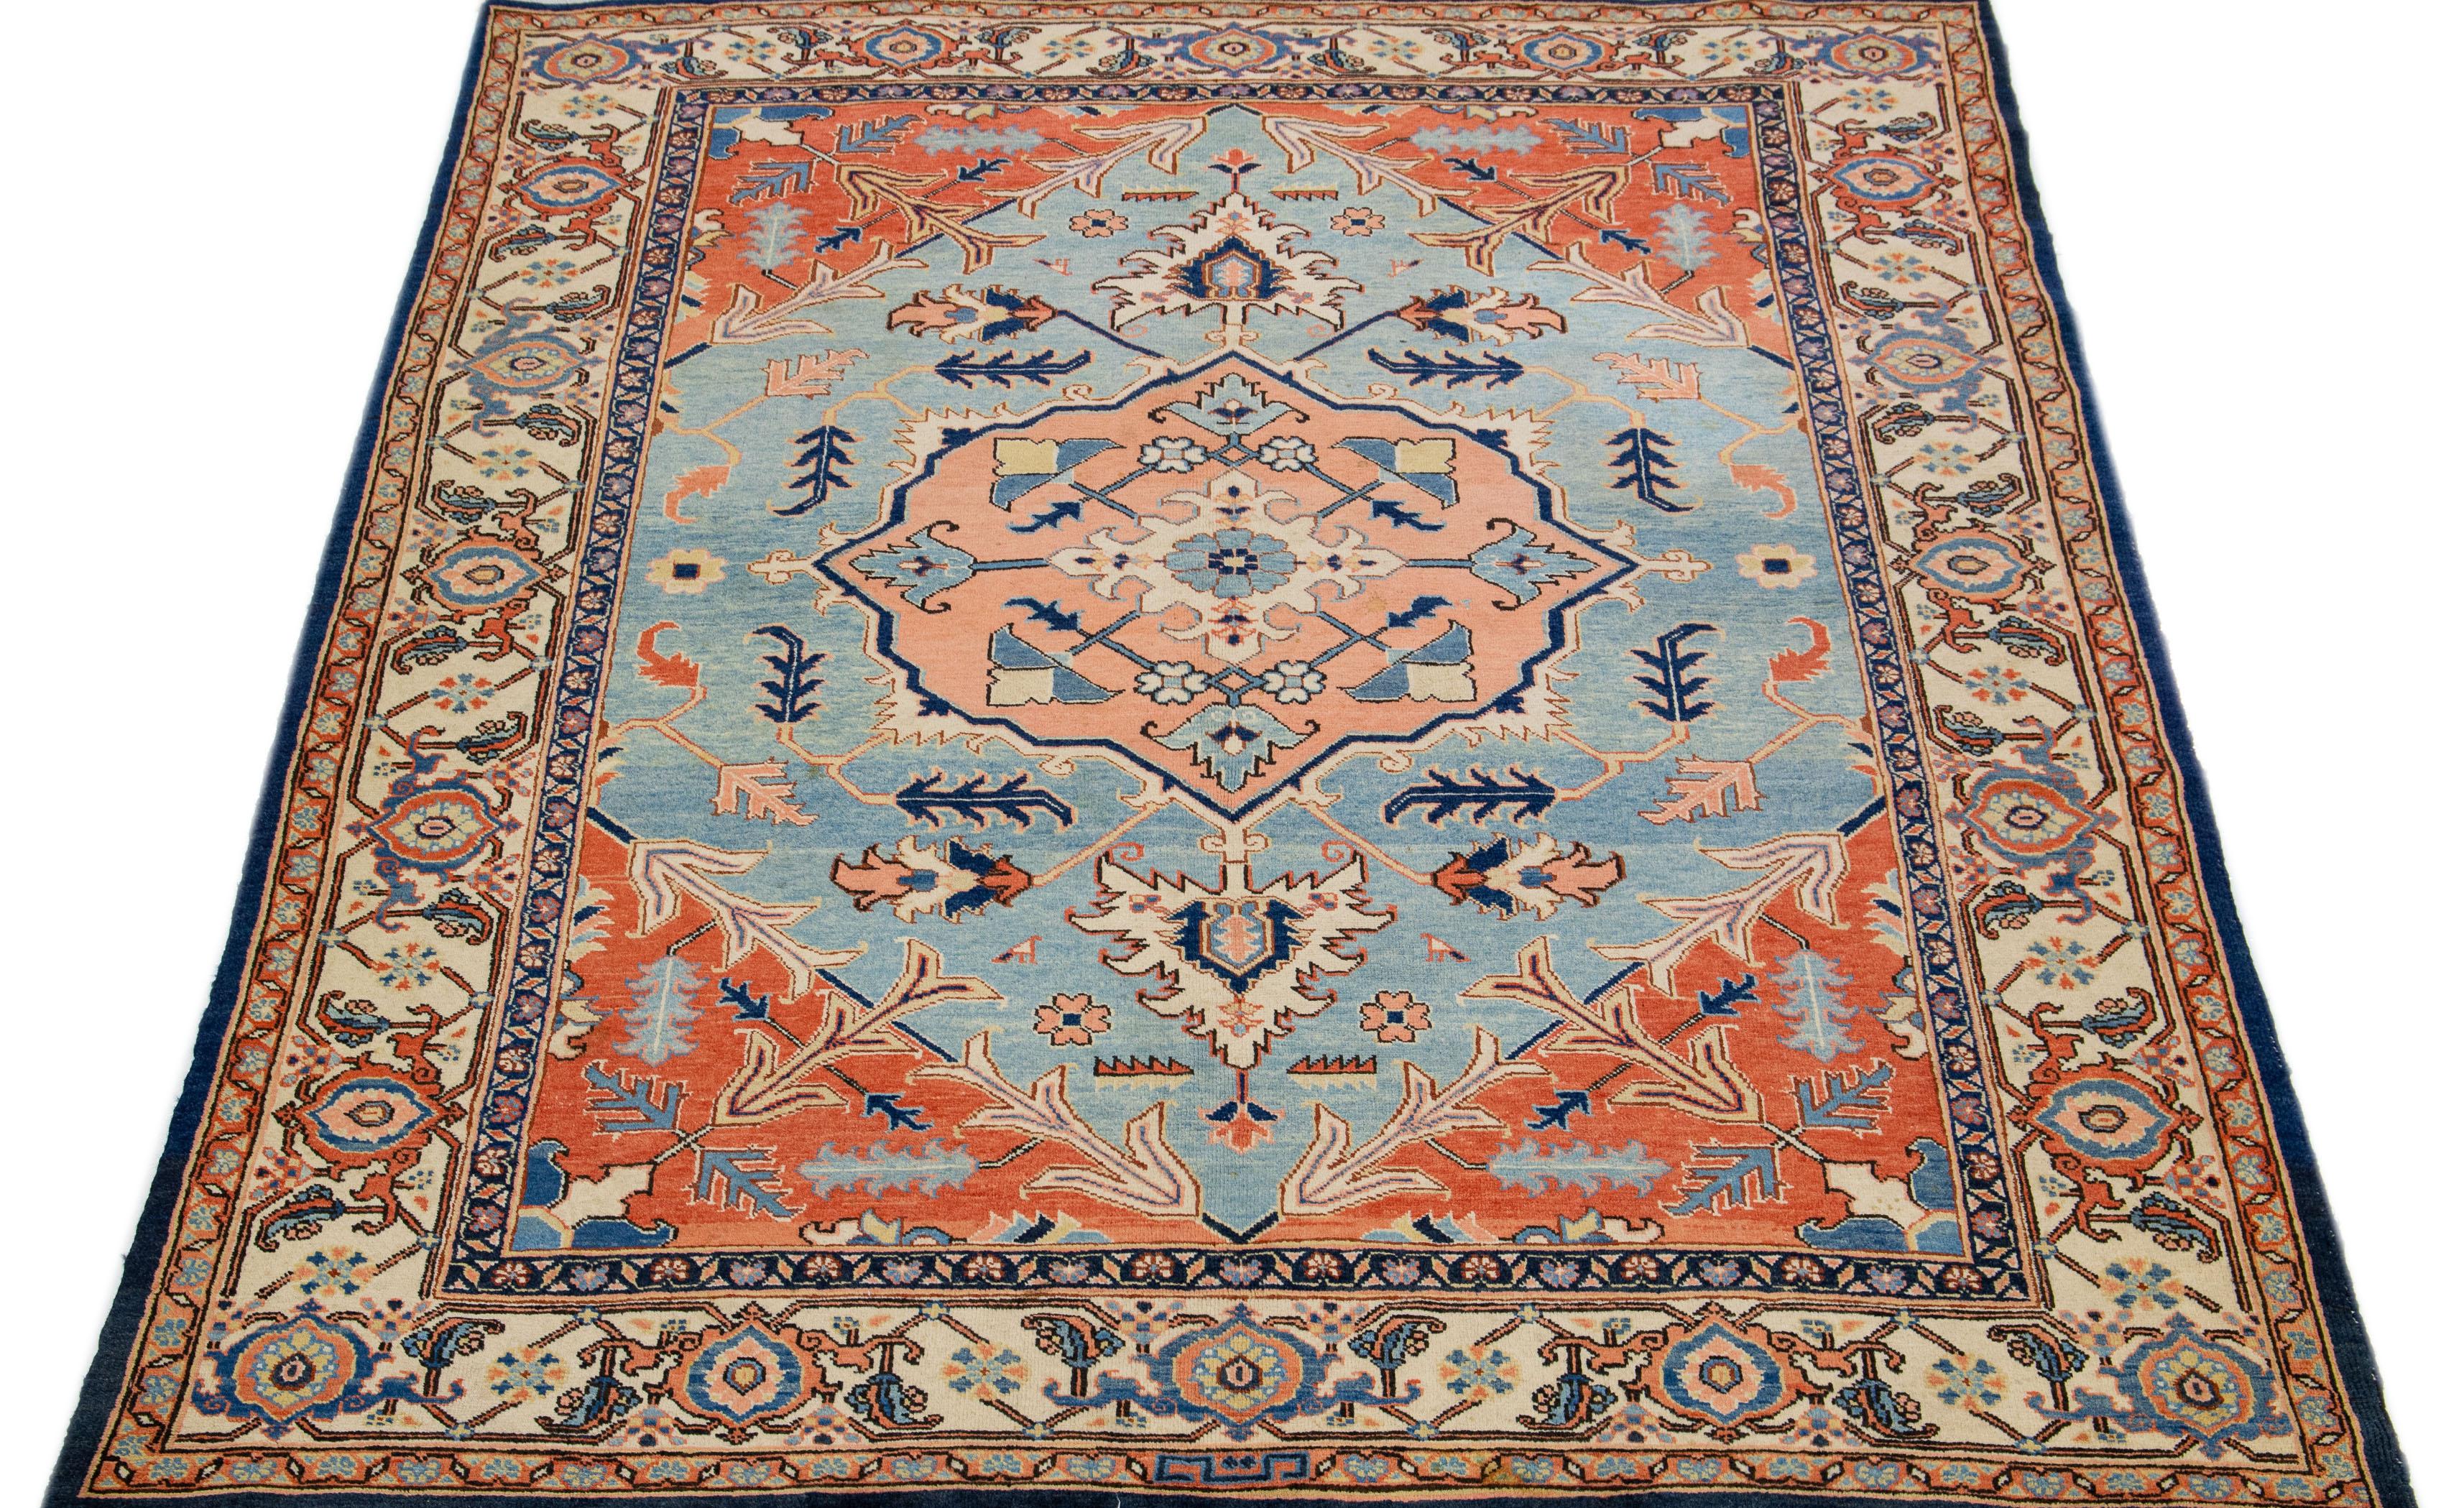 Beautiful Modern Heriz hand-knotted wool rug with a blue and rusted field. This Persian rug has a beige frame and accents in a gorgeous all-over layout geometric medallion floral motif.

This rug measures: 6'5